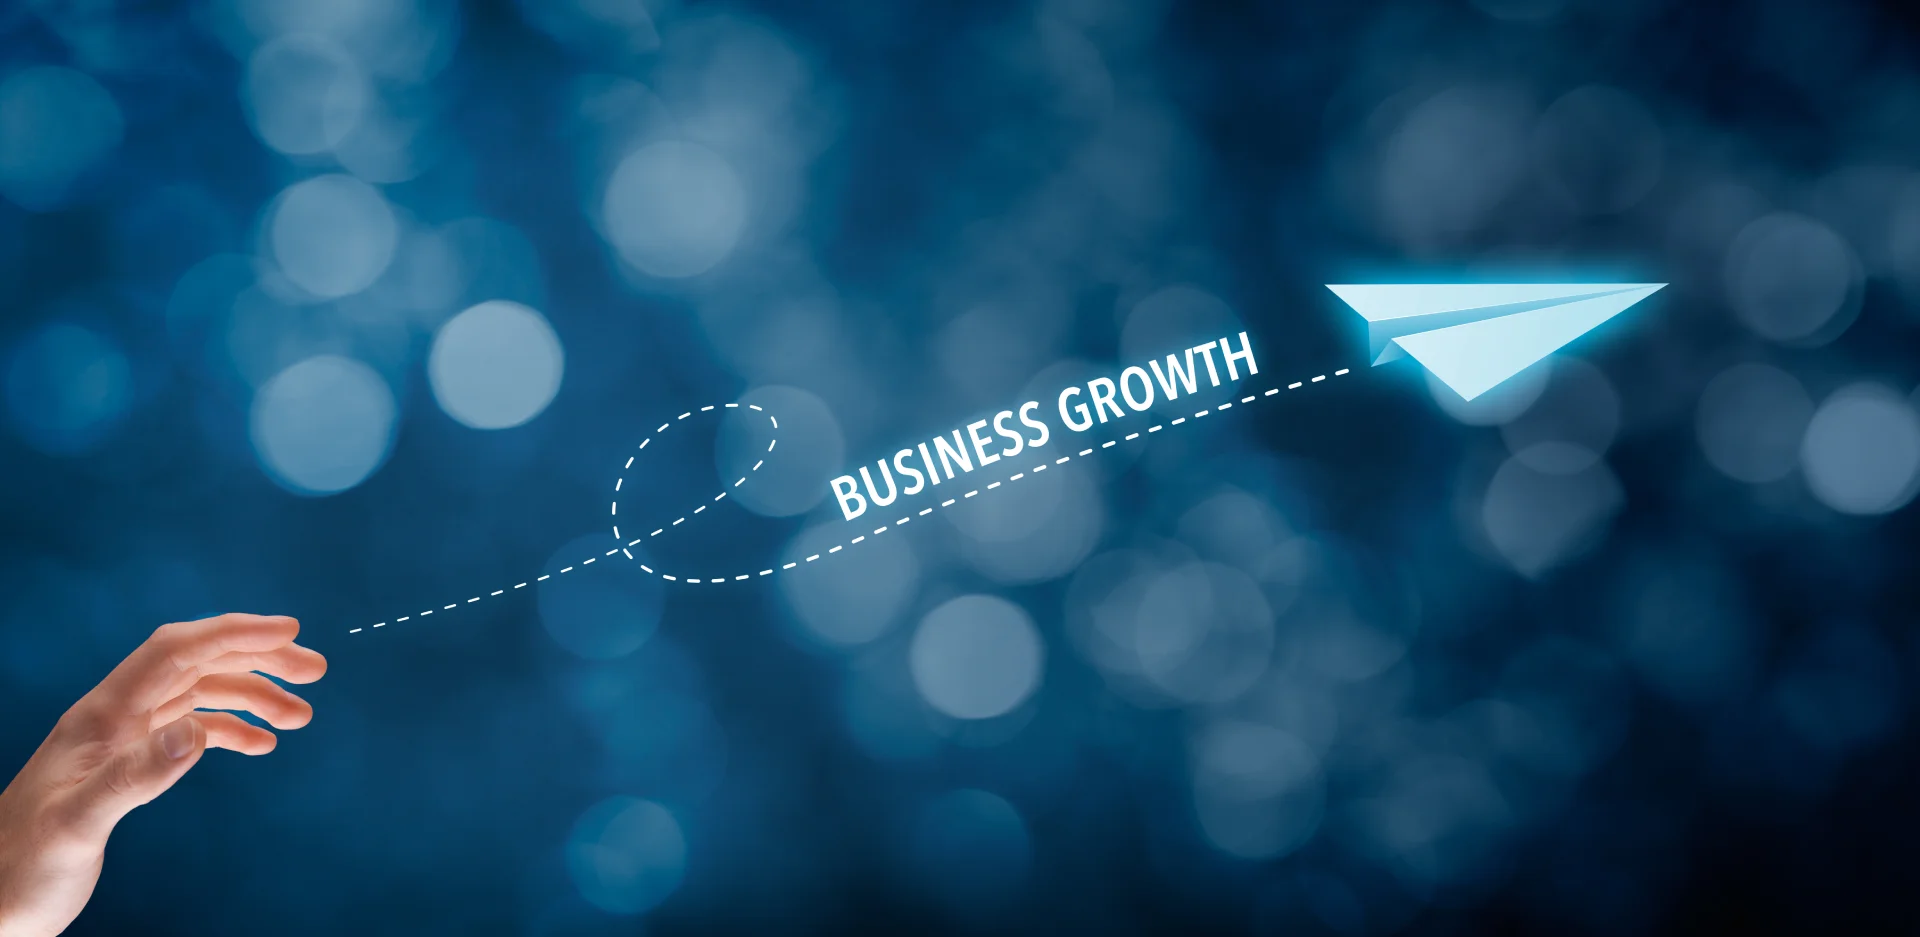 How to Use Infydots to Boost Your Business Growth